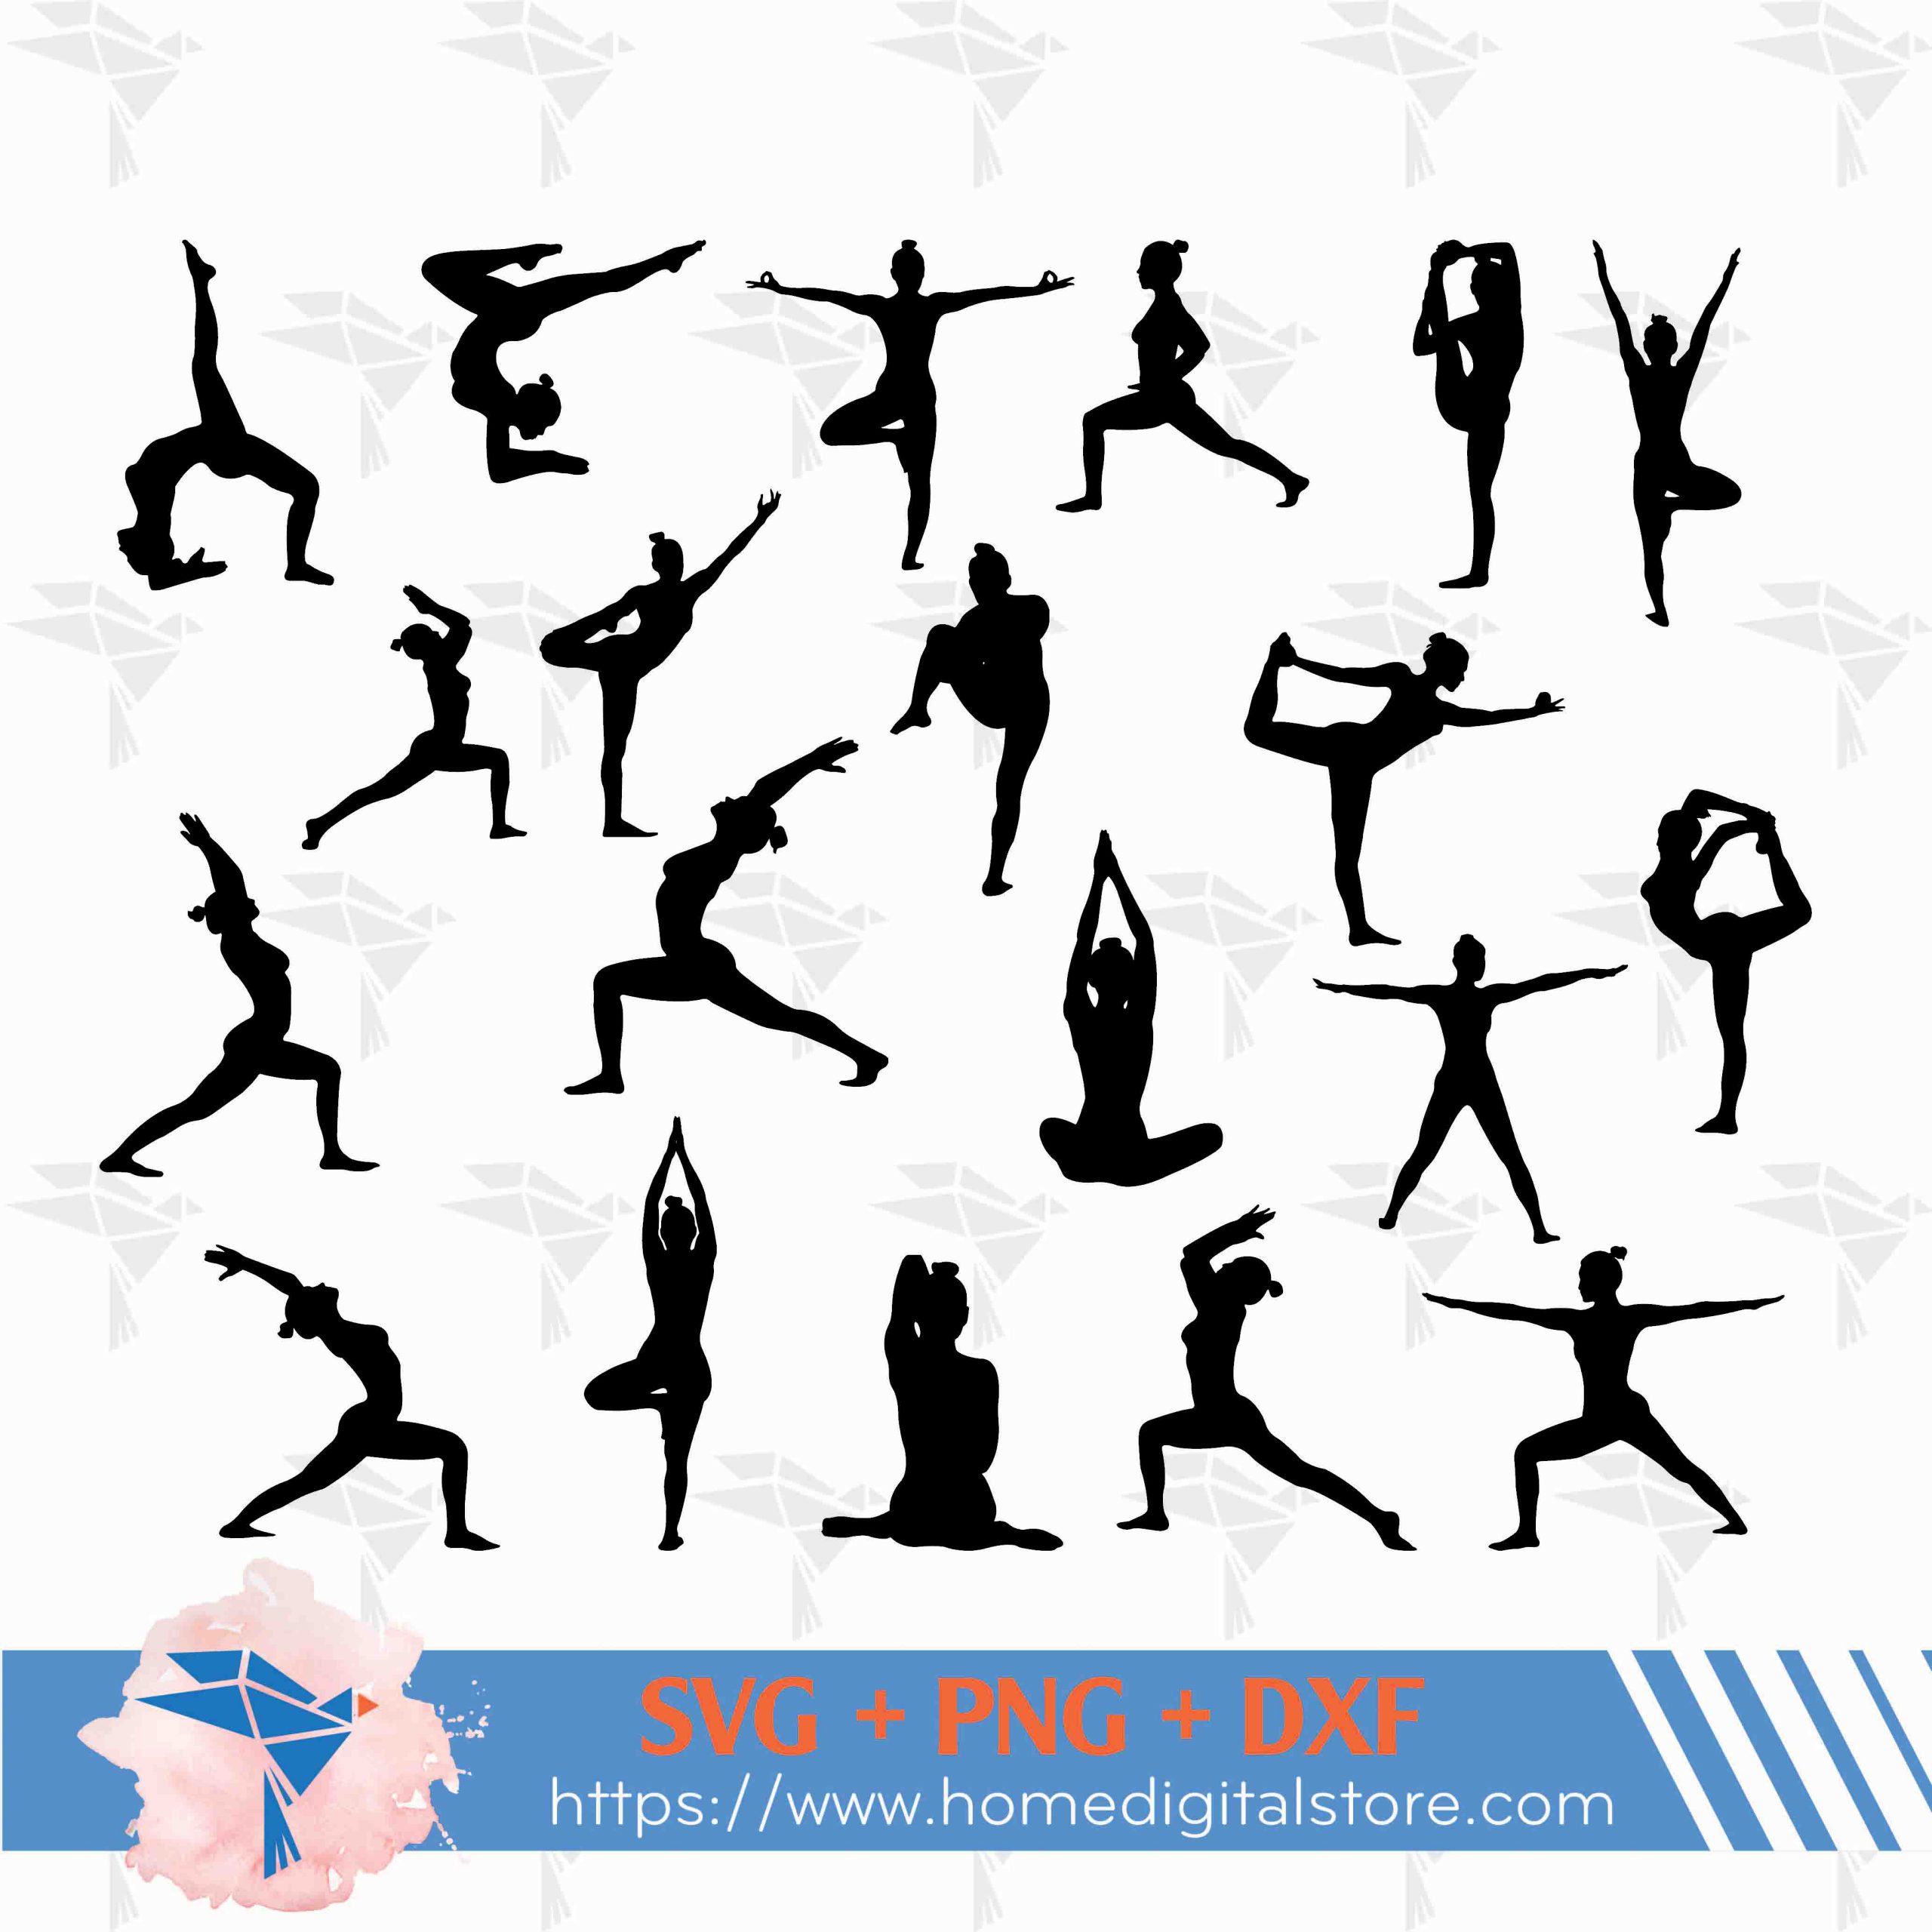 Yoga Silhouettes Collection Svg, Yoga Silhouette Png, Yoga Cut File Png,  Collection of Different Positions Yoga, Instant Download Files - Etsy